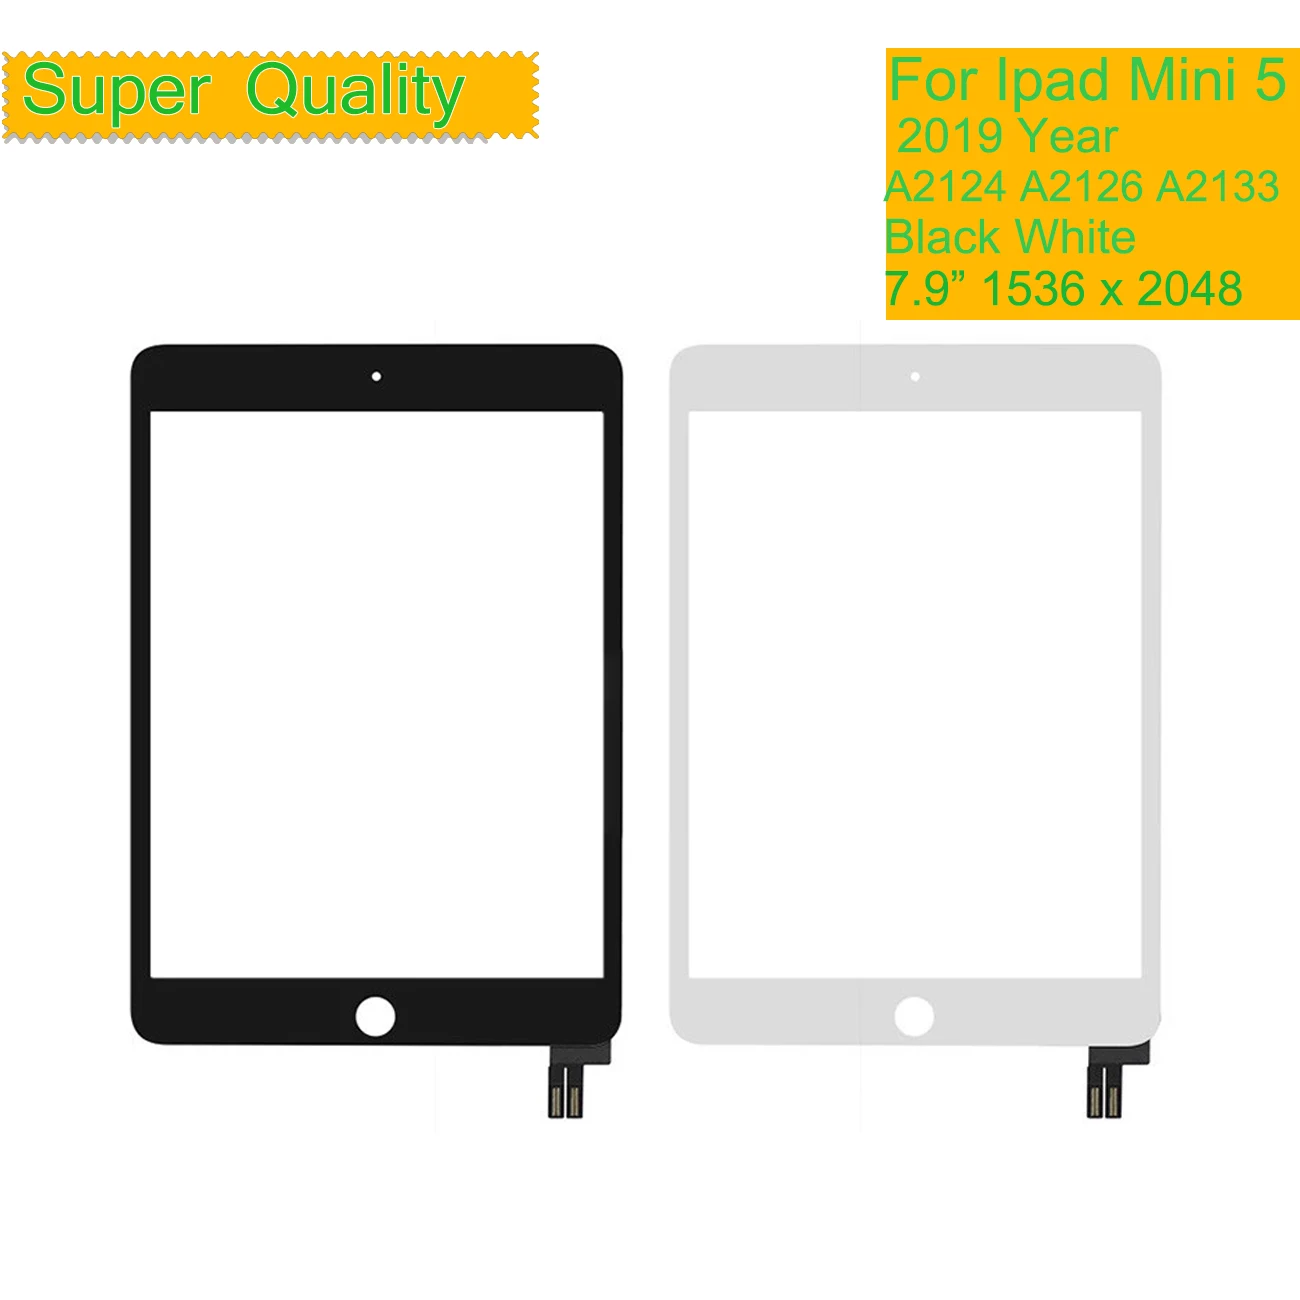 10Pcs/Lot For Apple iPad Mini 5 Touch Screen Digitizer Panel For iPad Mini 5 2019 A2124 A2126 A2133 LCD Front Outer Glass Sensor 5 5 for homtom ht10 ht 10 touch screen digitizer panel front outer front glass lens sensor free adhesive wipes